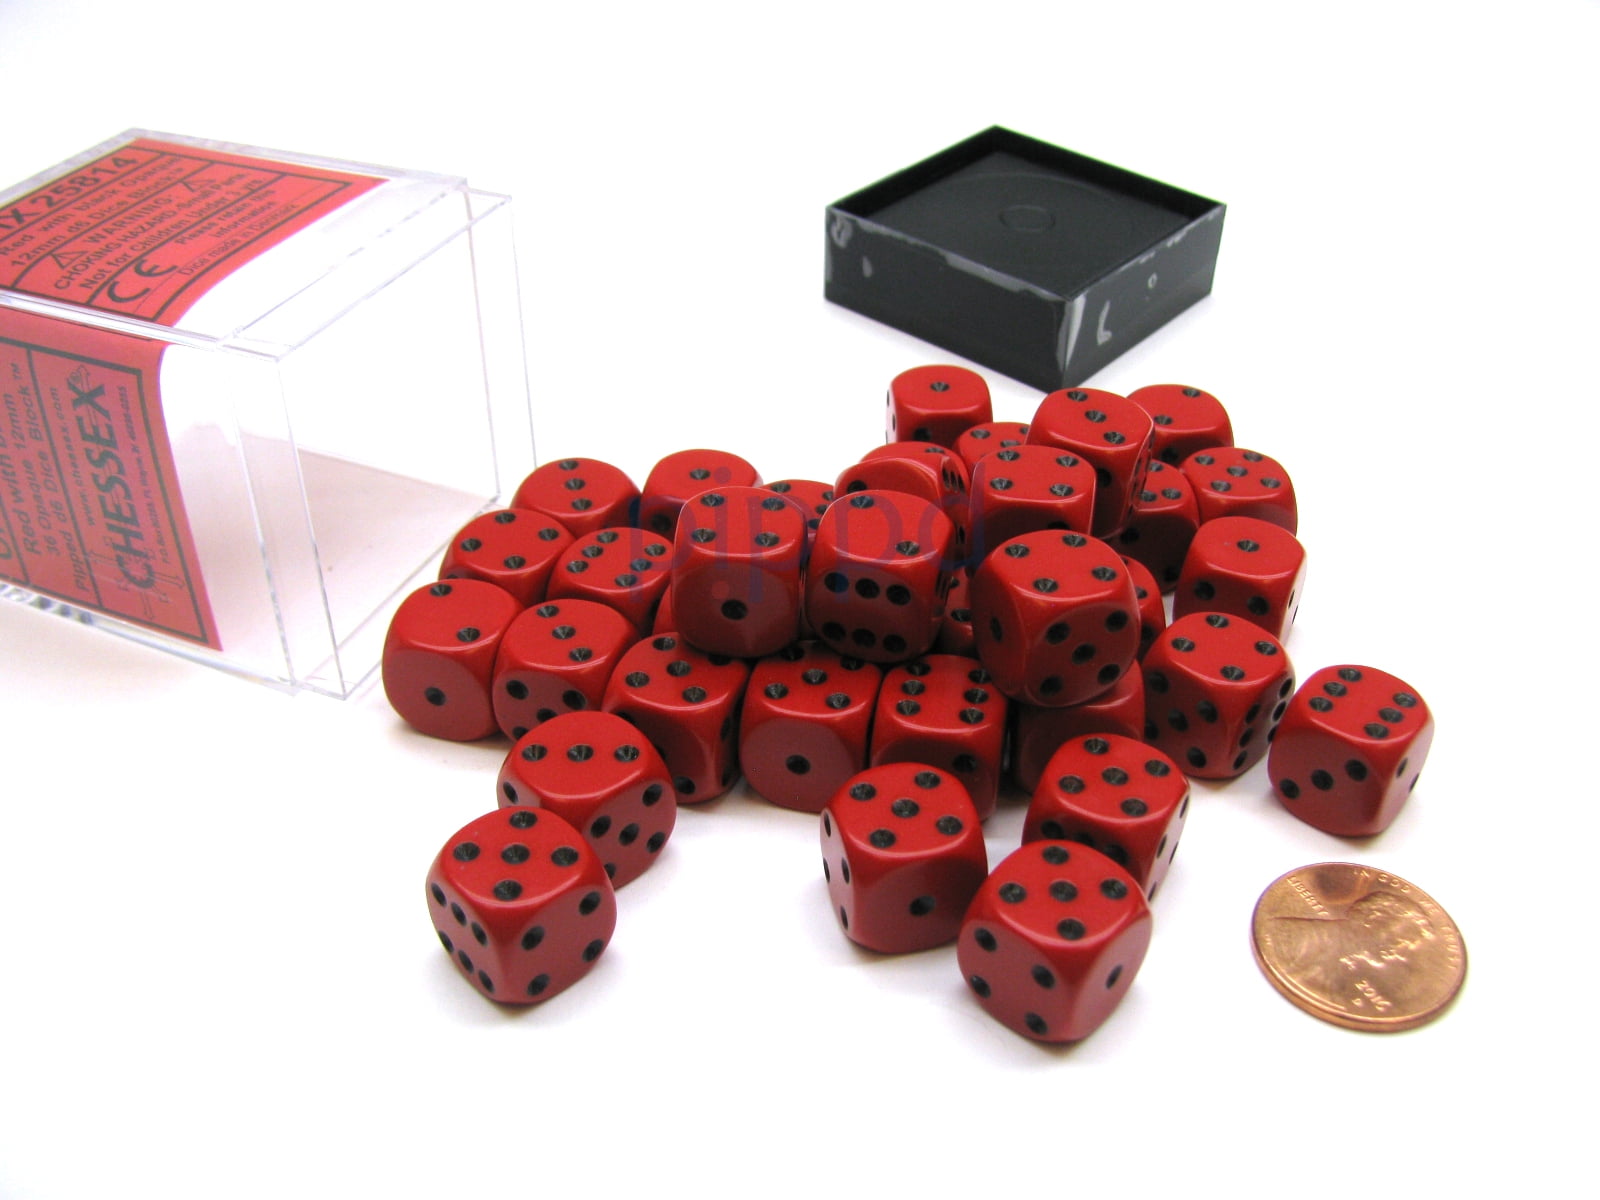 36 D6 RED AND WHITE DICE CHESSEX opaque 12mm SET OF 